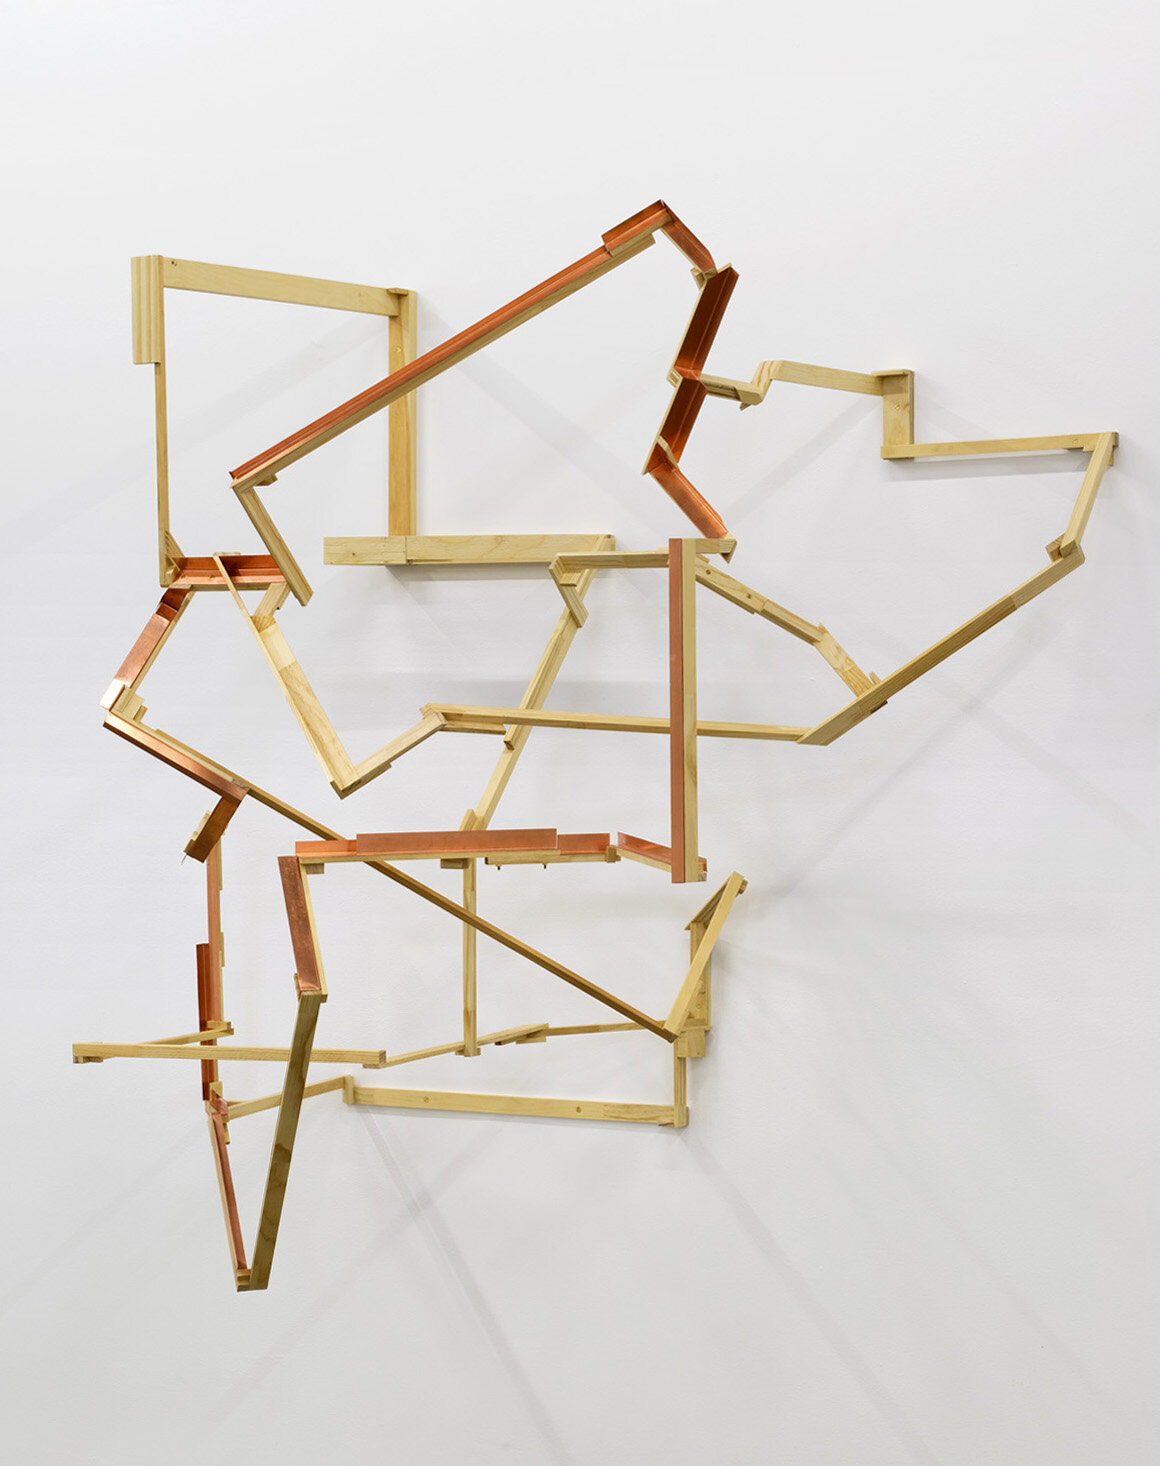   Knot 1 , 2021, pine trim and lumber, framing lumber, spruce plywood, copper, and brass hardware, 55 x 53 x 35 in 